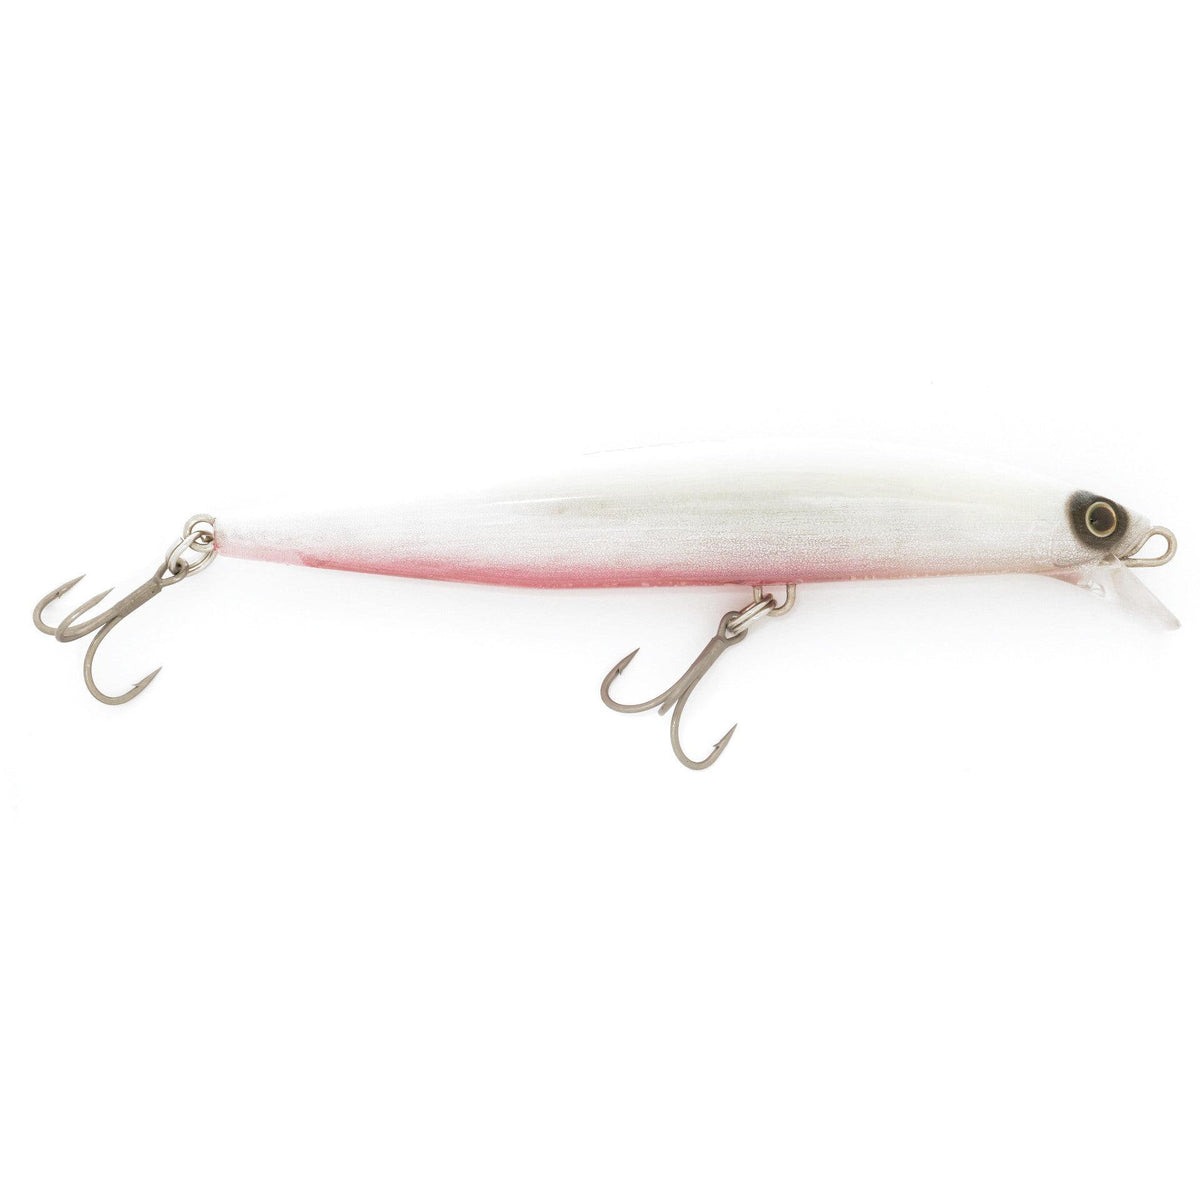 FANGS-62 Treble Hook | 2X | Saltwater Ultra-Antirust Coating | Needle Point  | O'Shaughnessy Bend